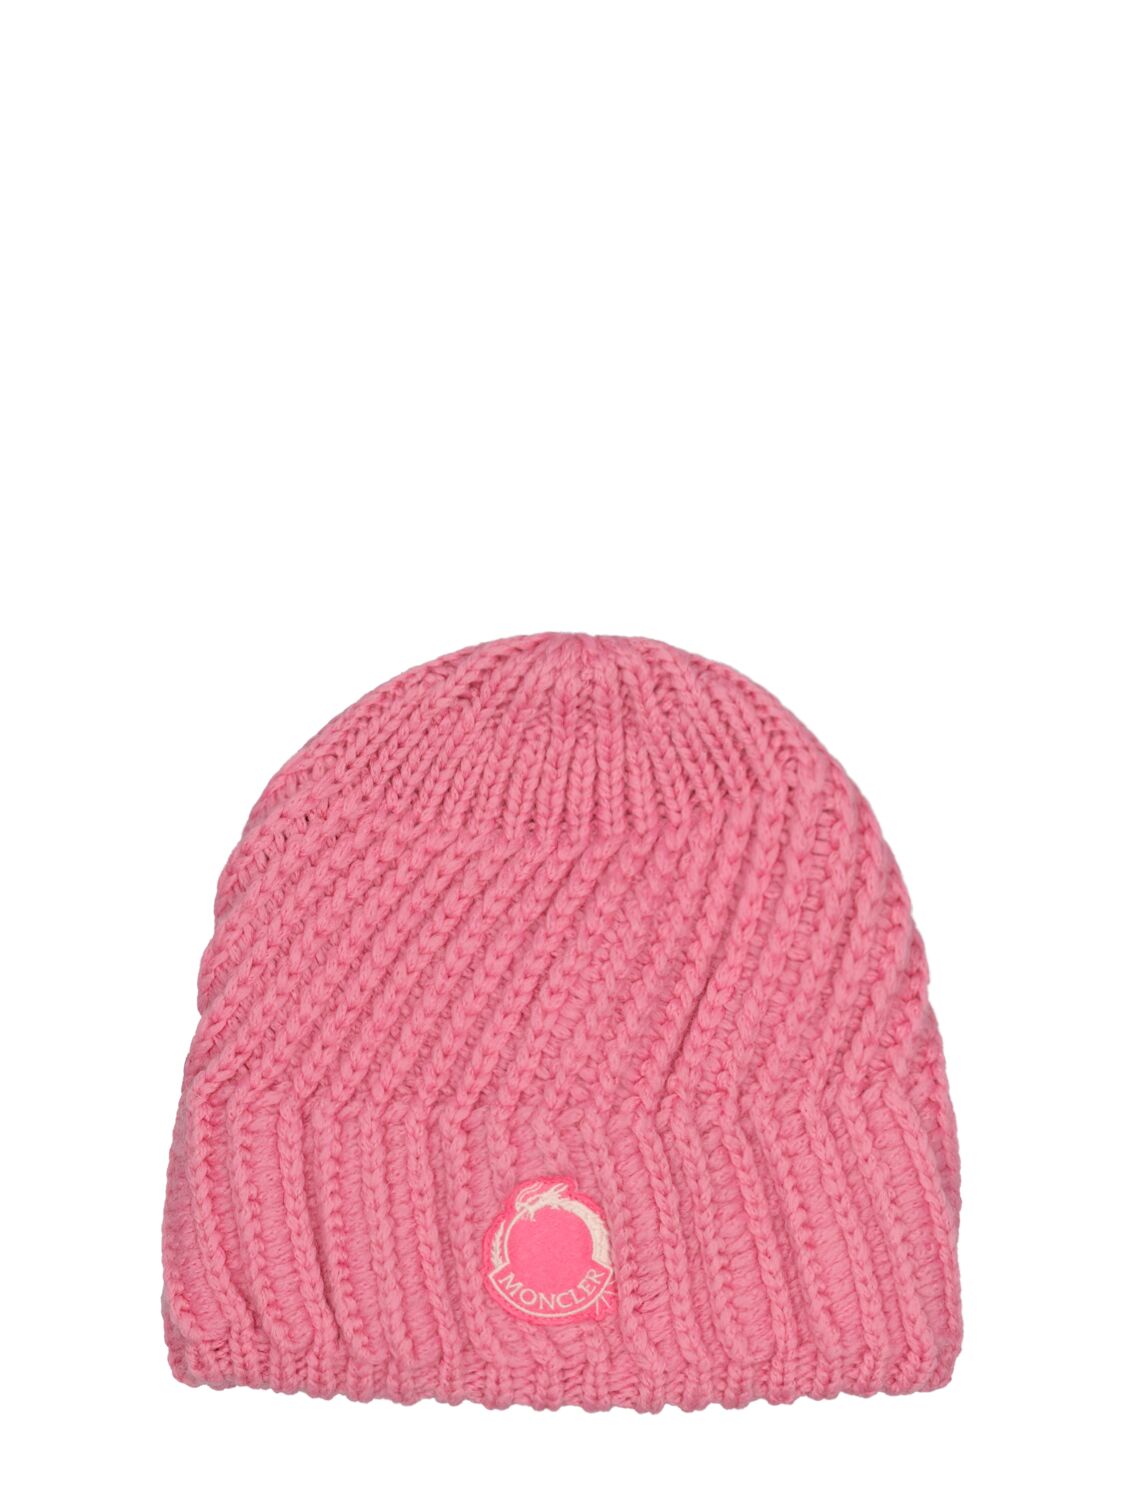 Image of Cny Wool Blend Beanie